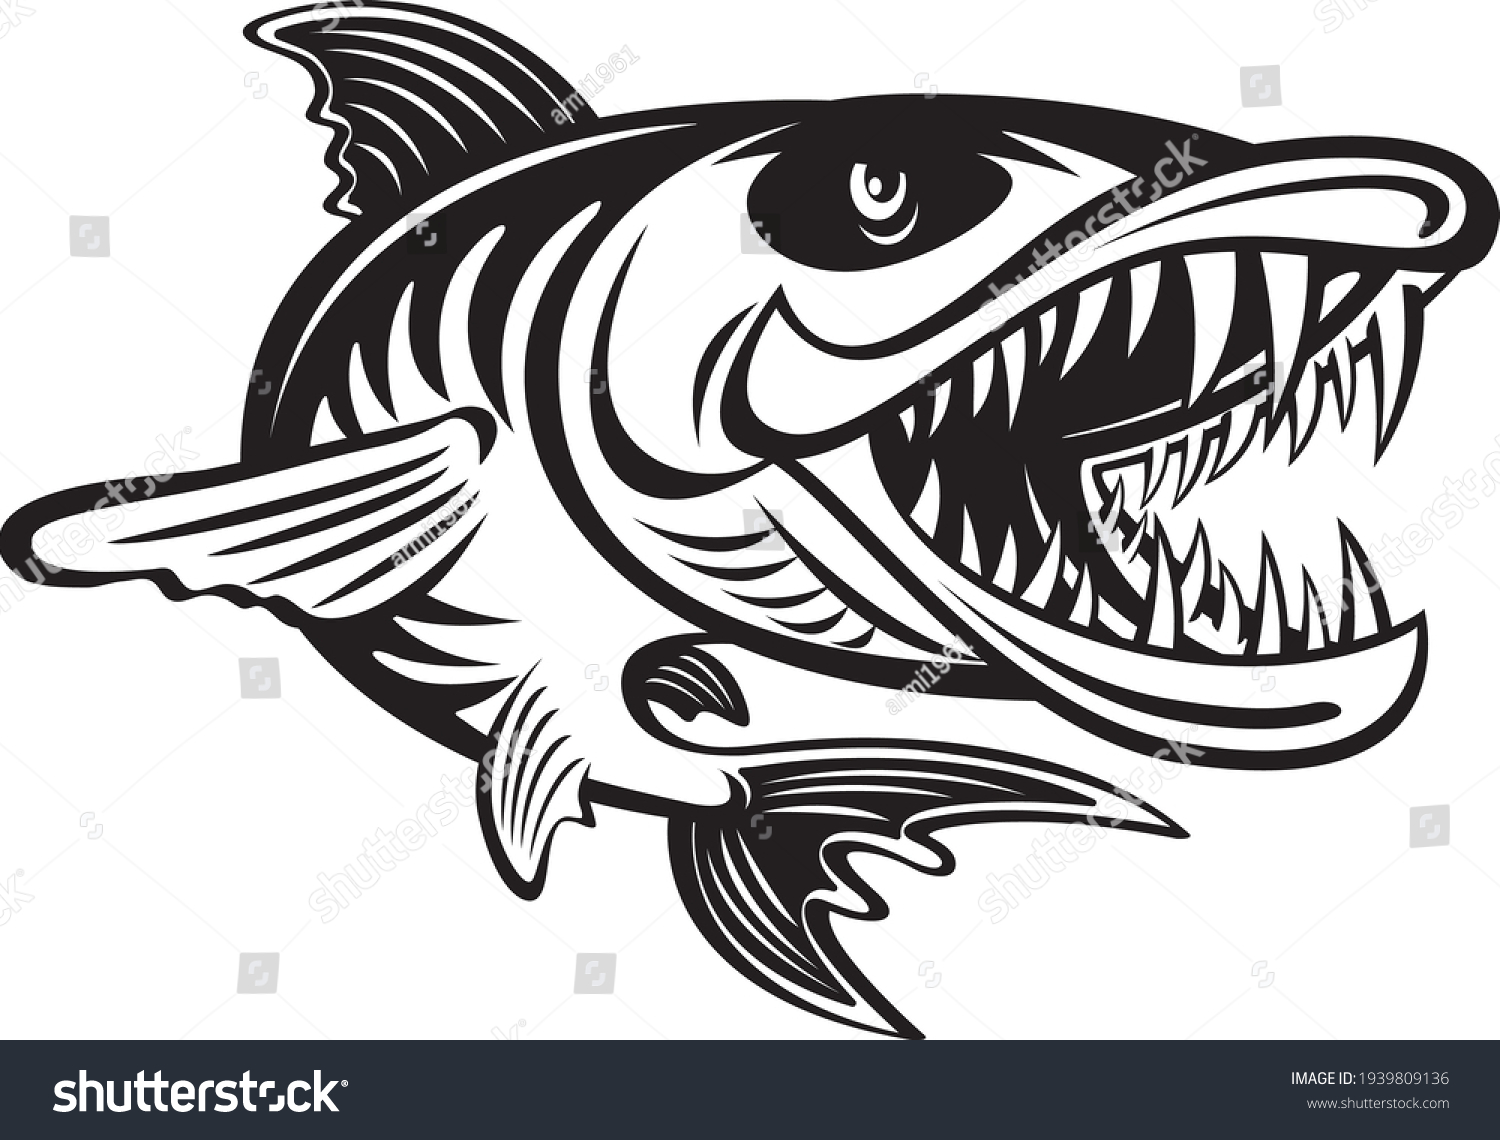 SVG of angry jumping cartoon style barracuda svg